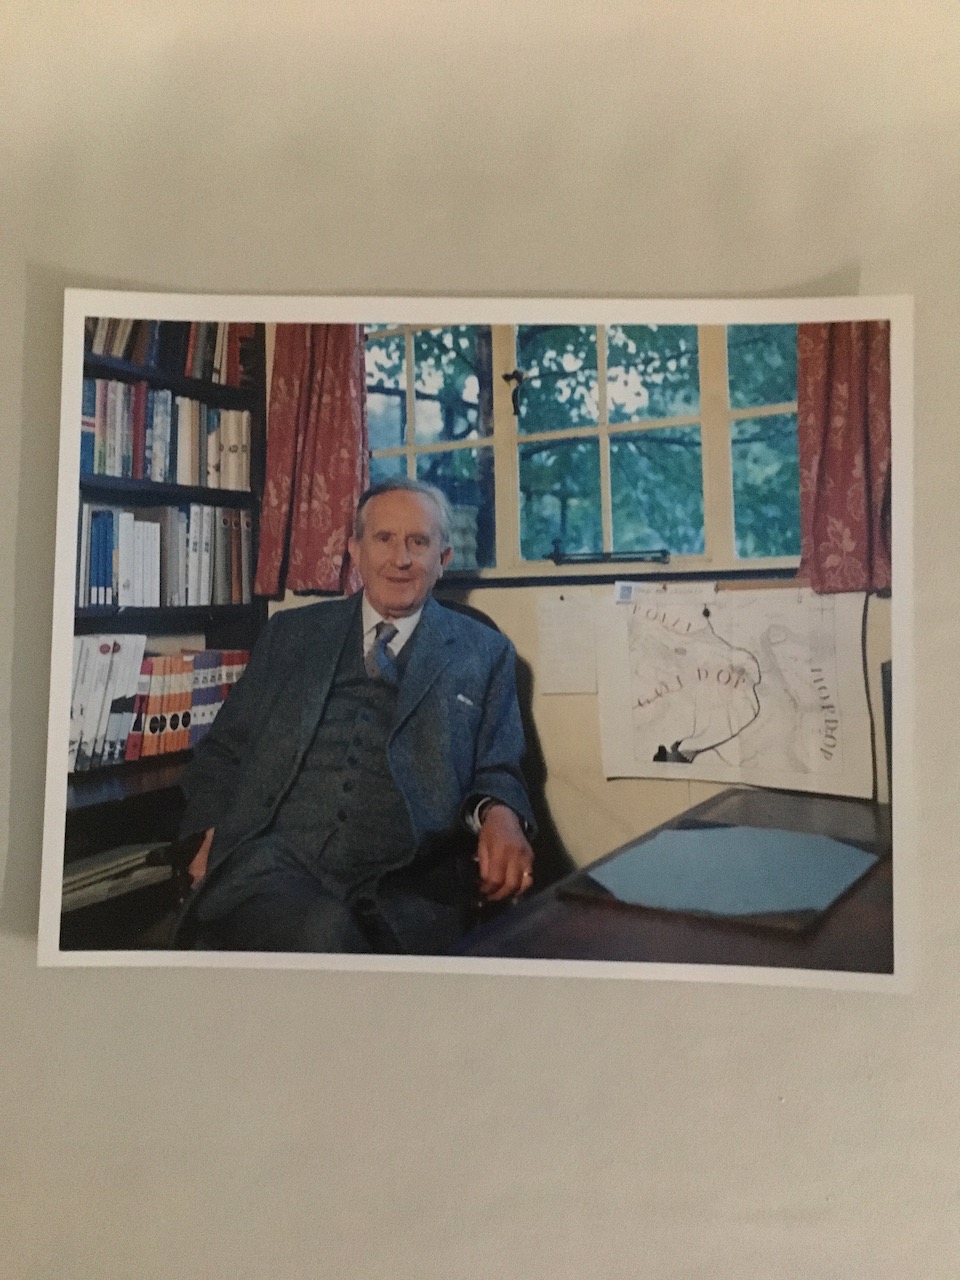 Exclusive Photographic Print: J.R.R. Tolkien seated in his study beside a map of Middle-earth